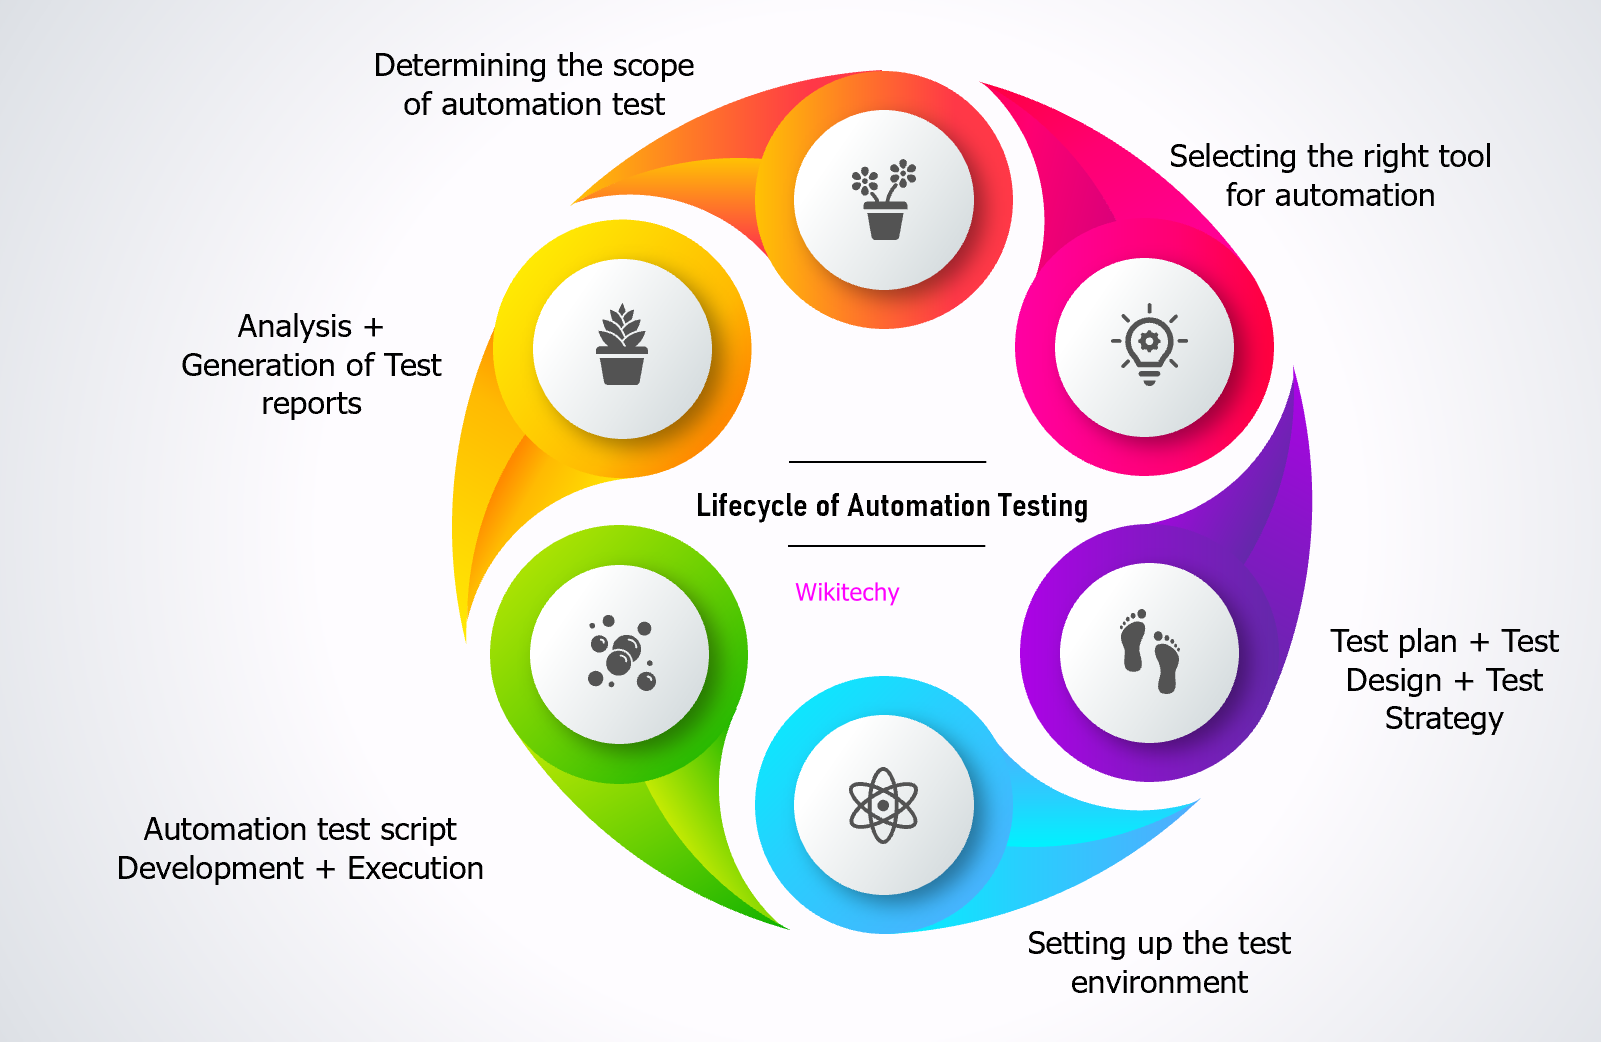 Lifecycle of Automation Testing